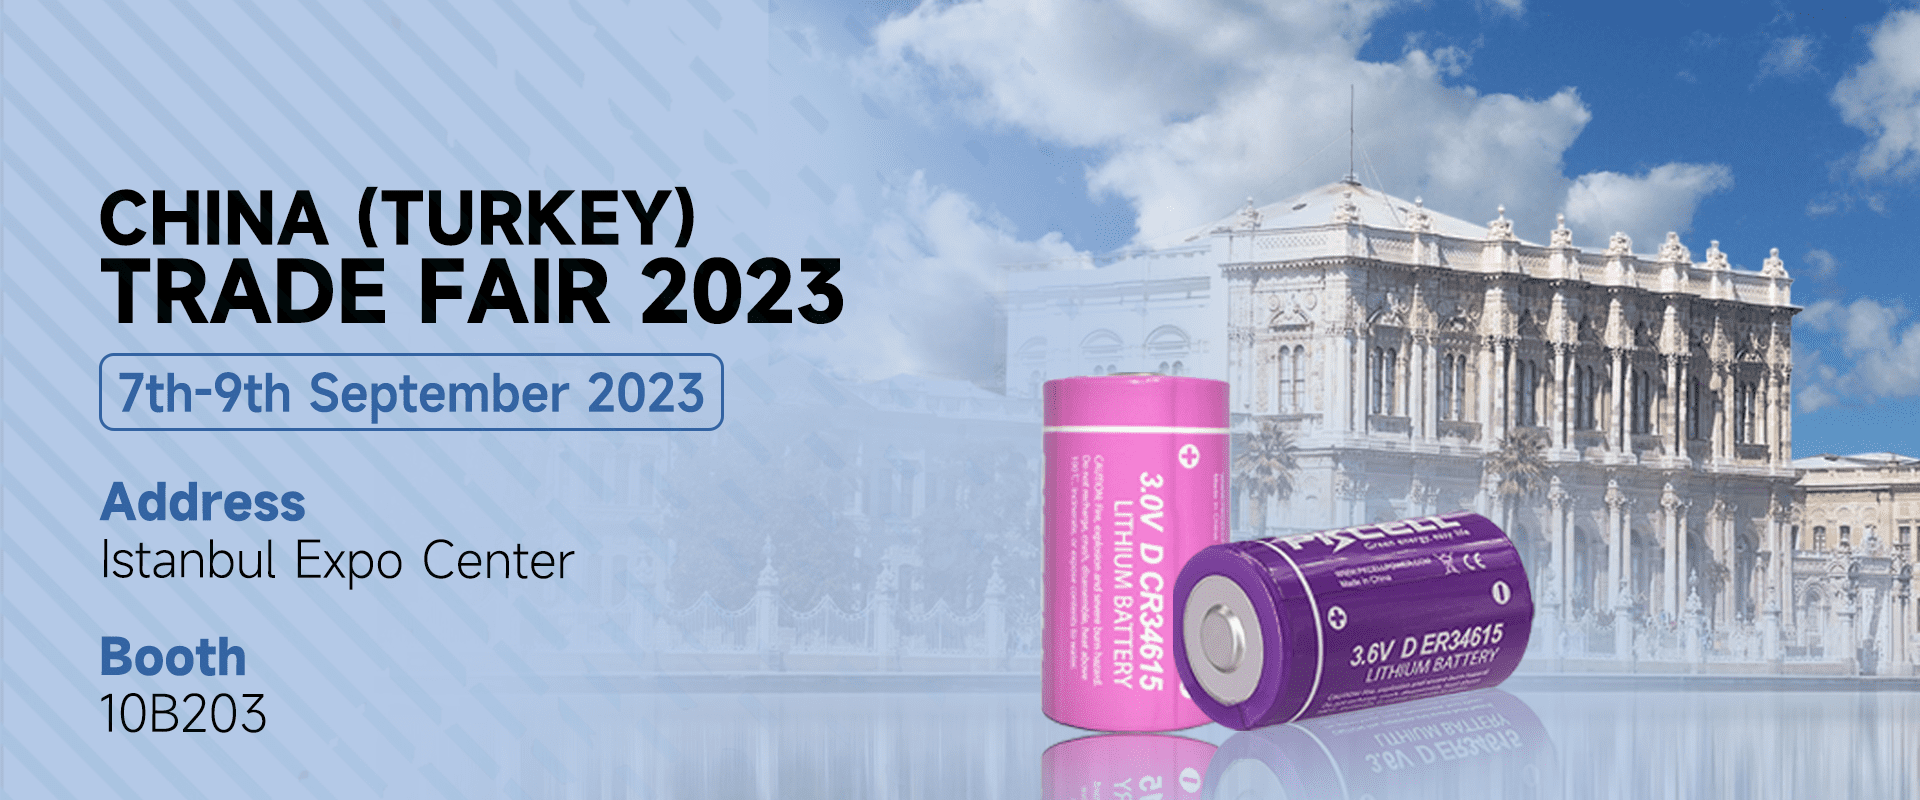 Shenzhen Pkcell Battery Co., Ltd. will participate in CHINA (TURKEY) TRADE FAIR 2023!